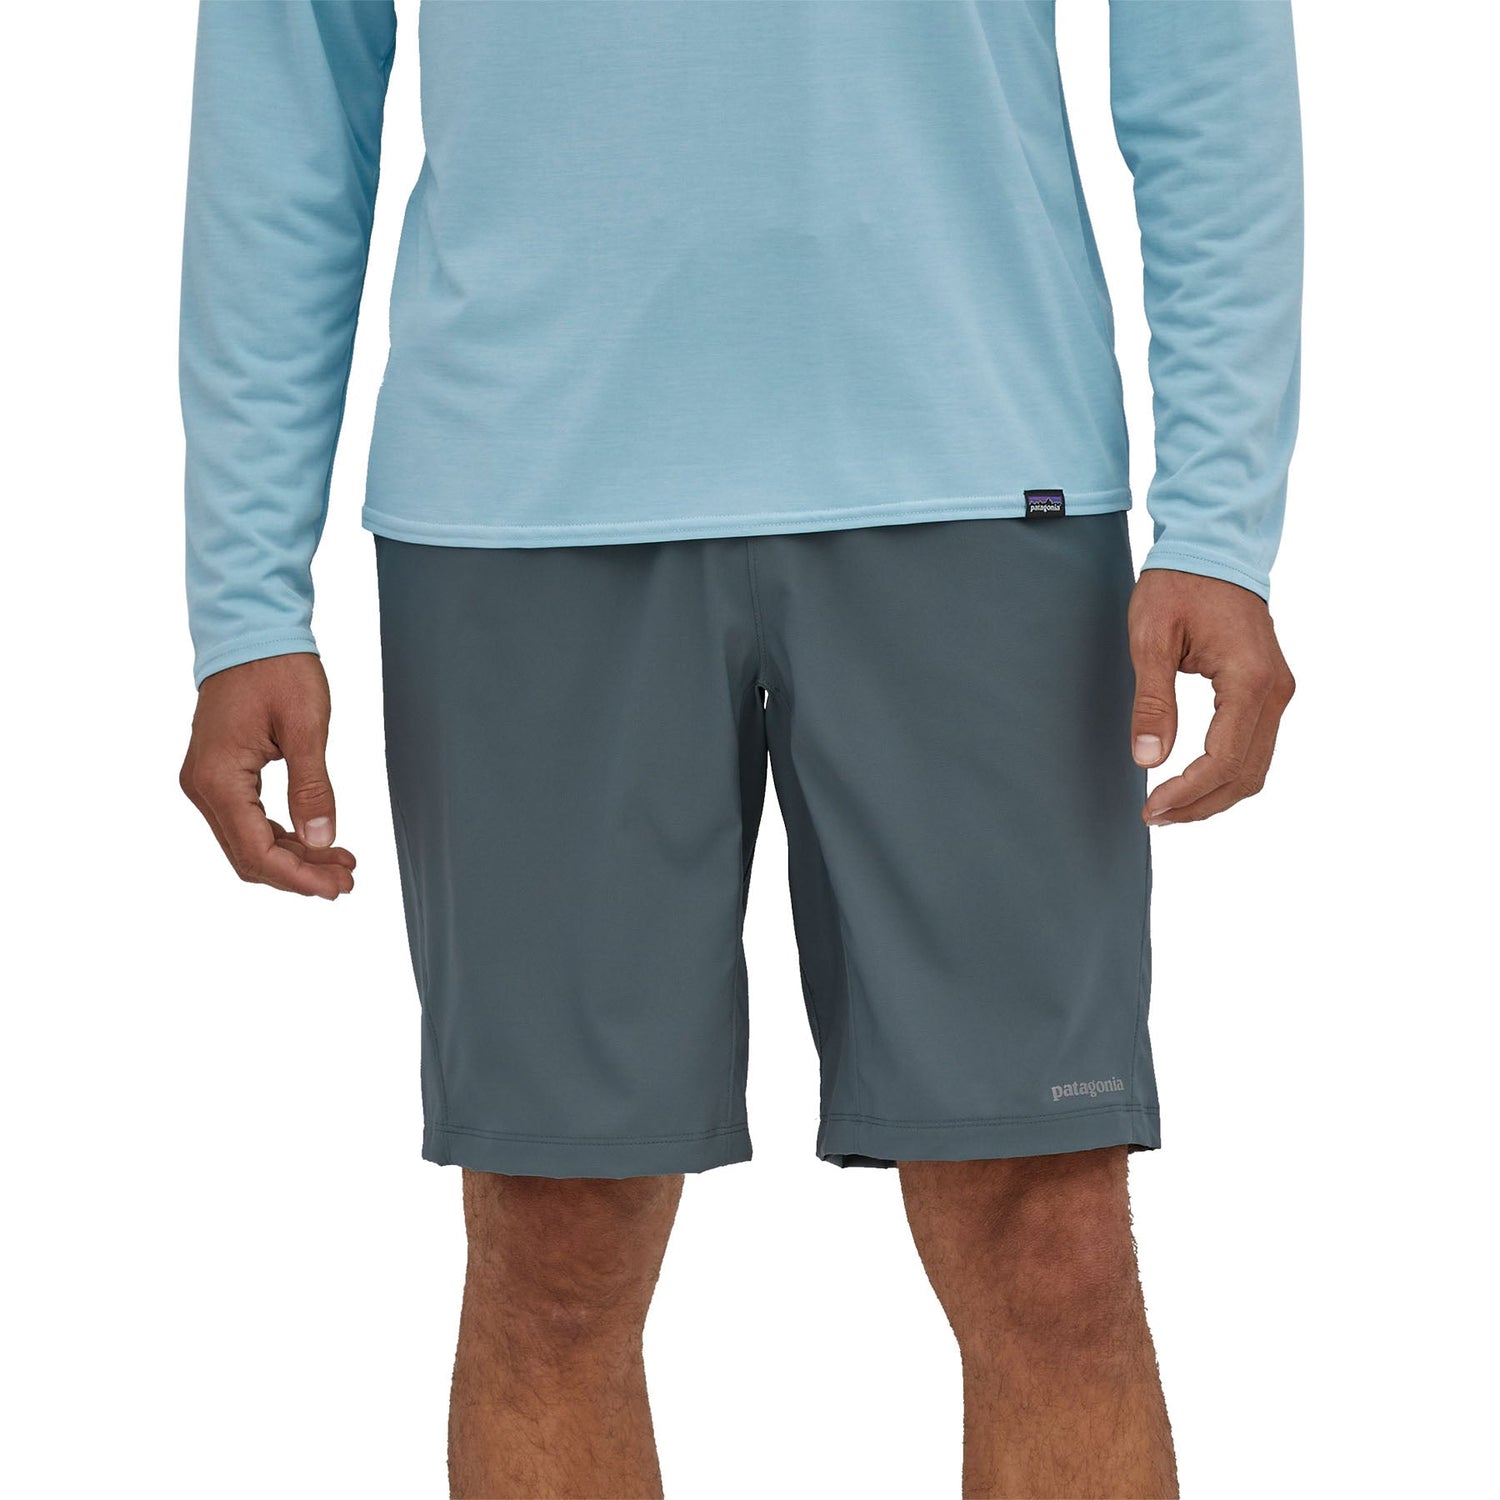 Patagonia - M's Terrebonne Shorts - Recycled Polyester - Weekendbee - sustainable sportswear